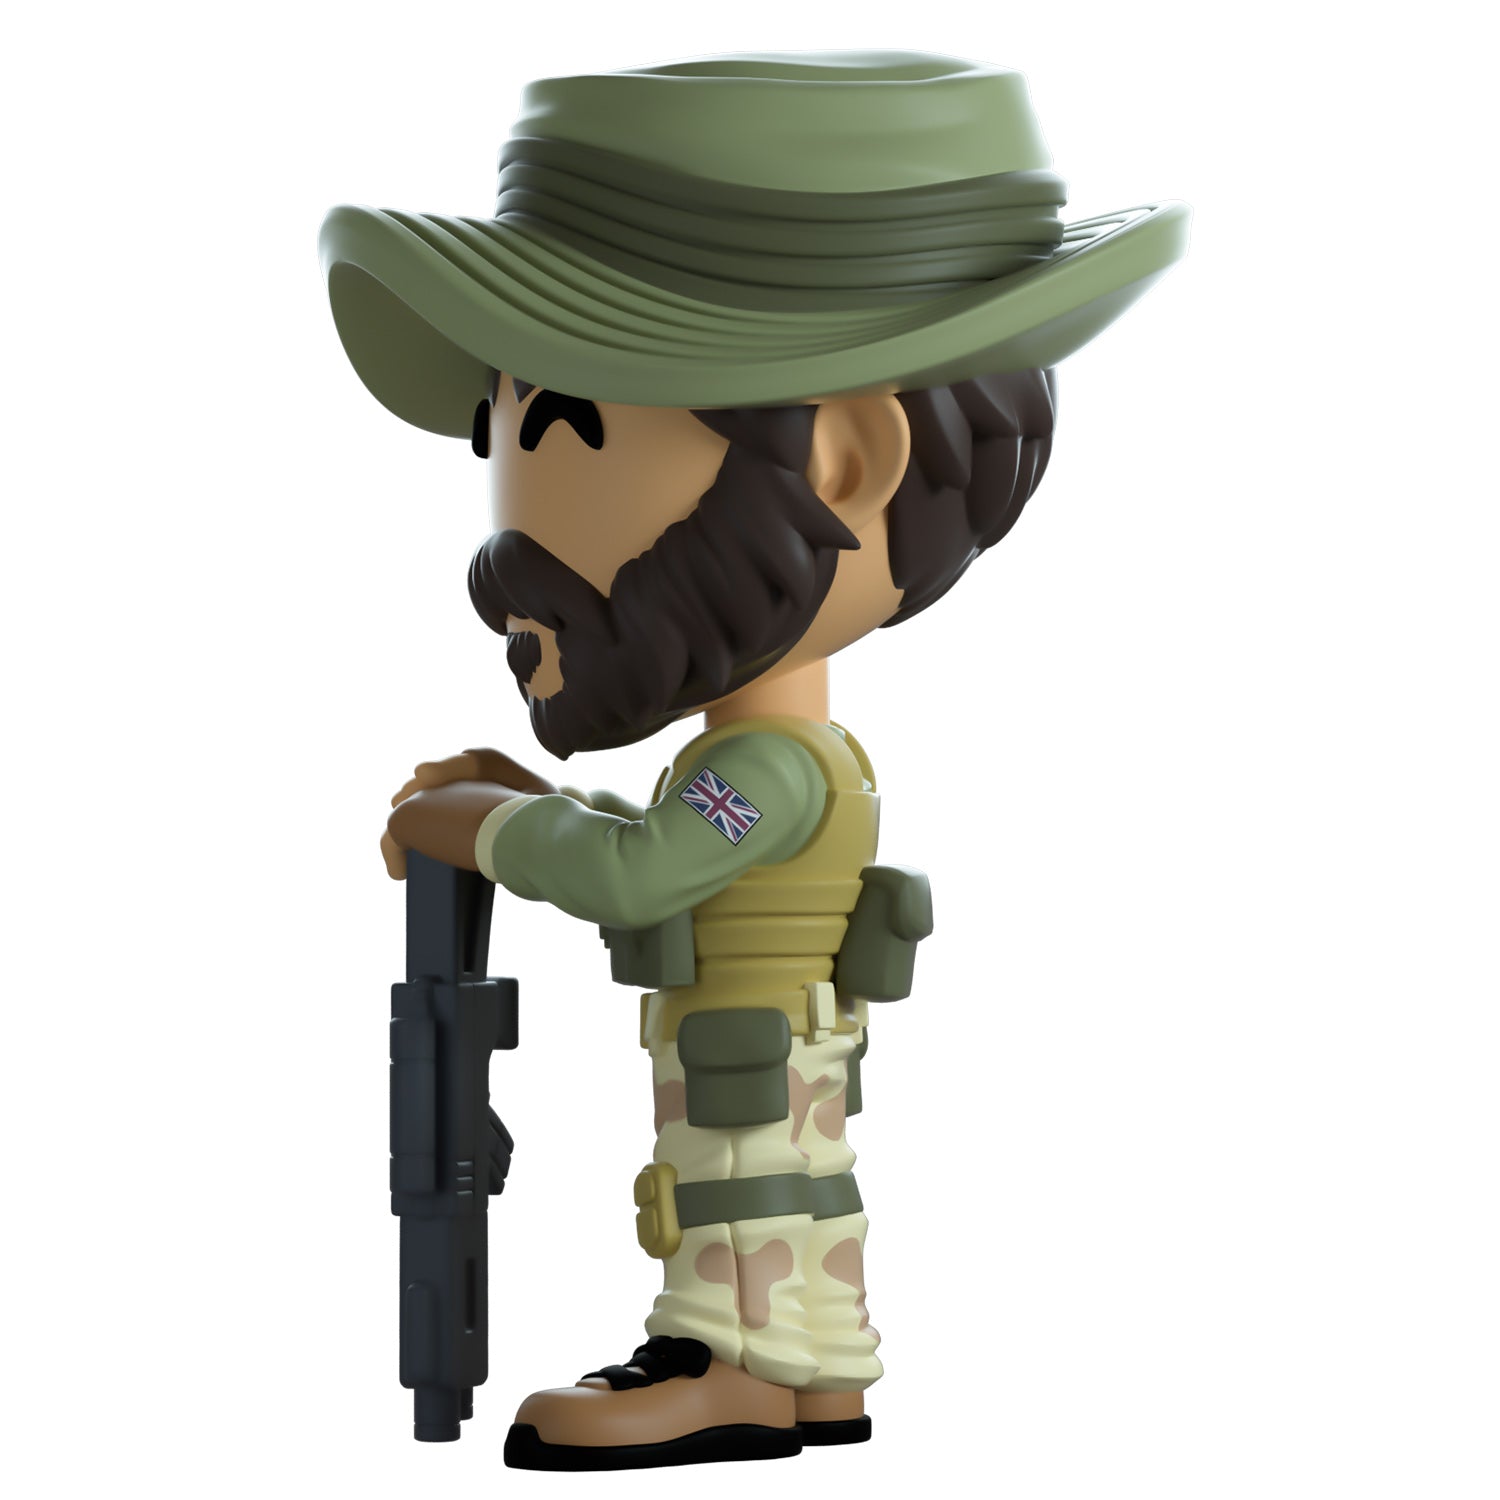 Call of Duty Captain Price Youtooz Vinyl Figure - Call of Duty Store